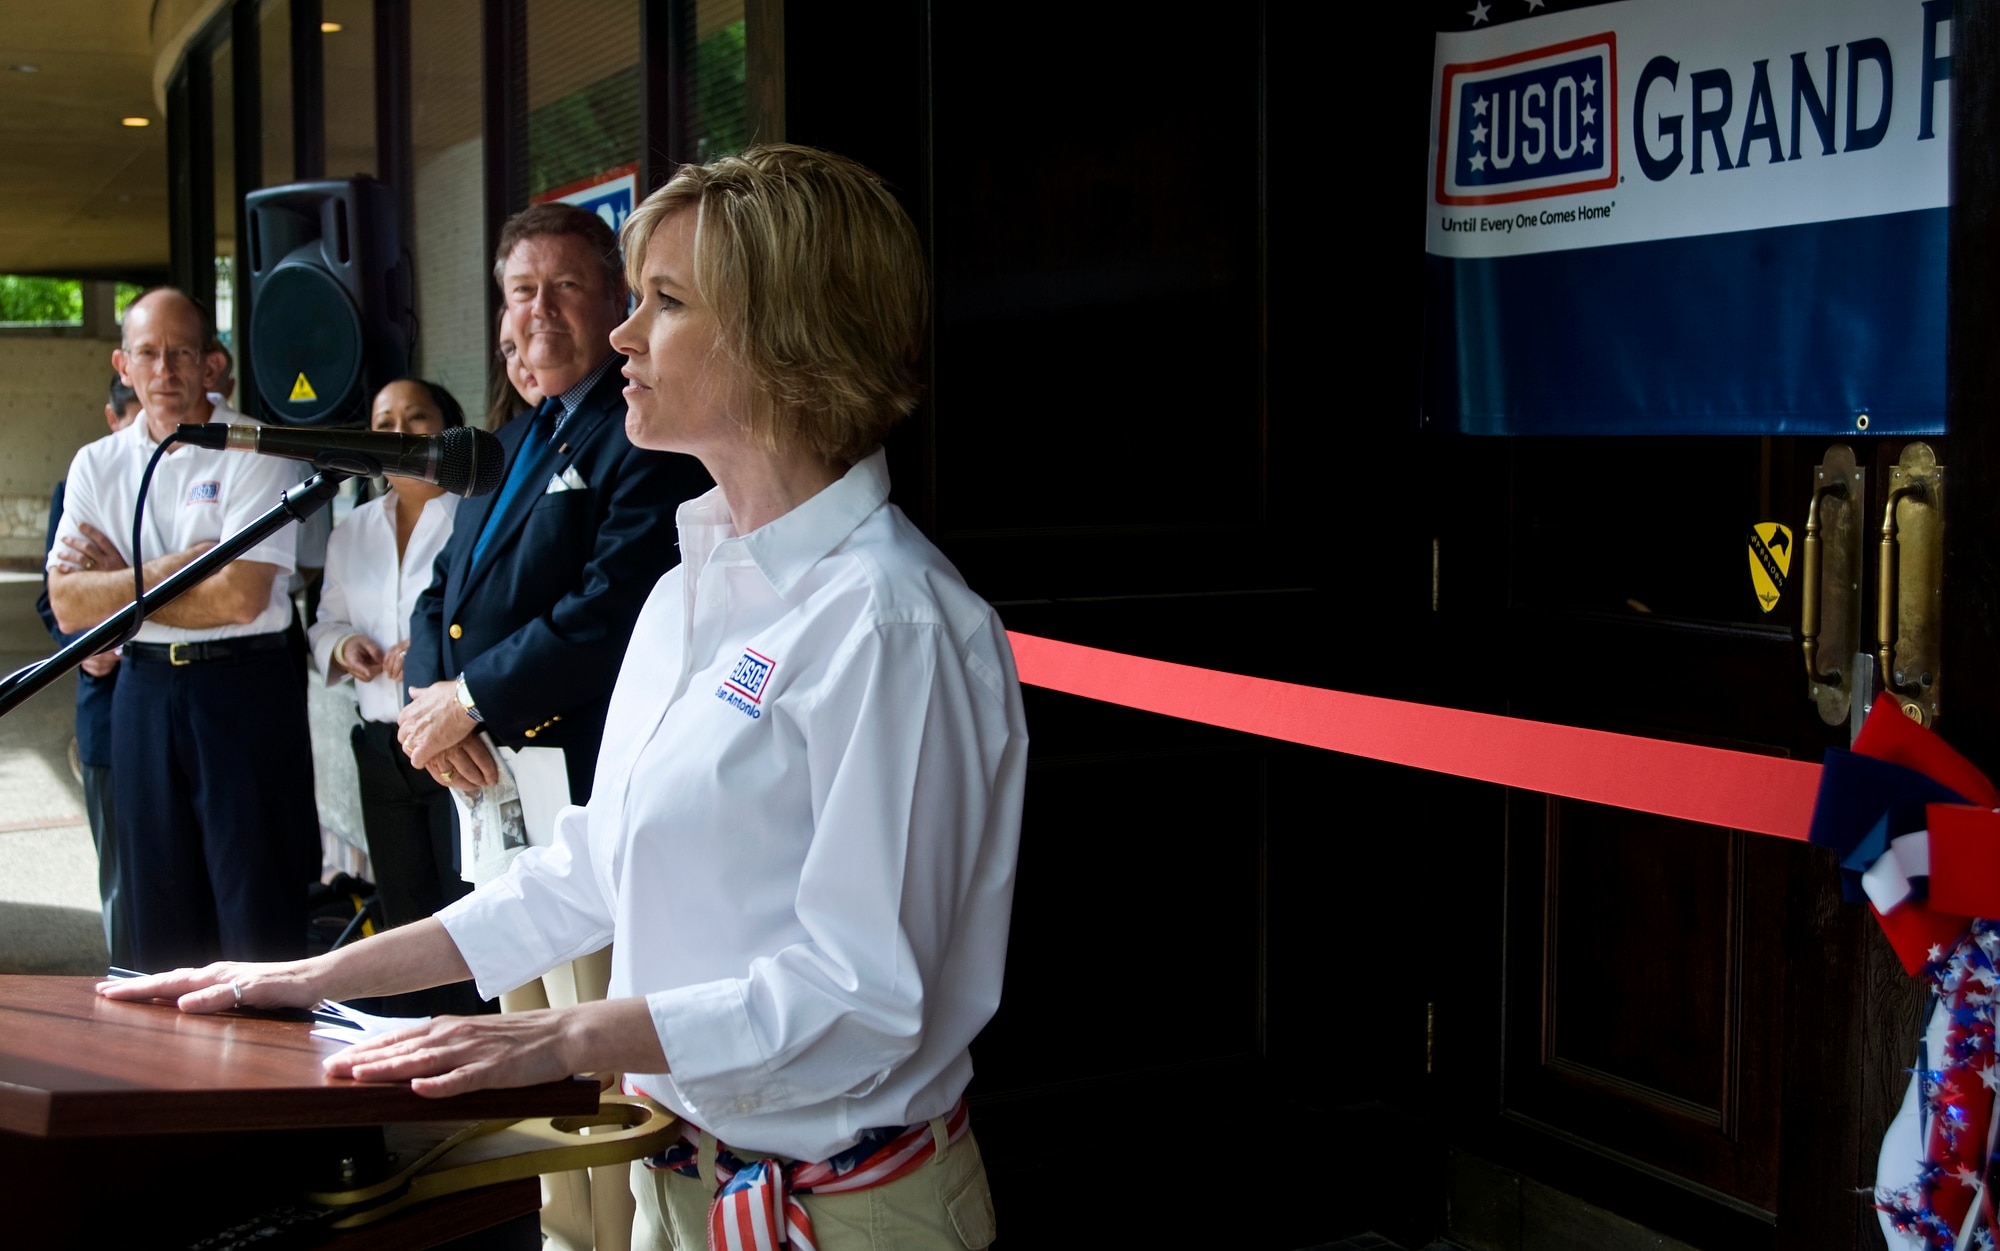 Shari Jenson, director of USO San Antonio, provides welcoming remarks Apr. 7, to the veterans and dignitaries present for the reoping of the USO San Antonio River Center. The center which averages 3,000 patrons a month was closed for a four month renovation to upgrade to a state-of-the-art-facility to better serve the troops stationed in the area.
(U.S. Air Force photo/Staff Sgt. Bennie J. Davis III)